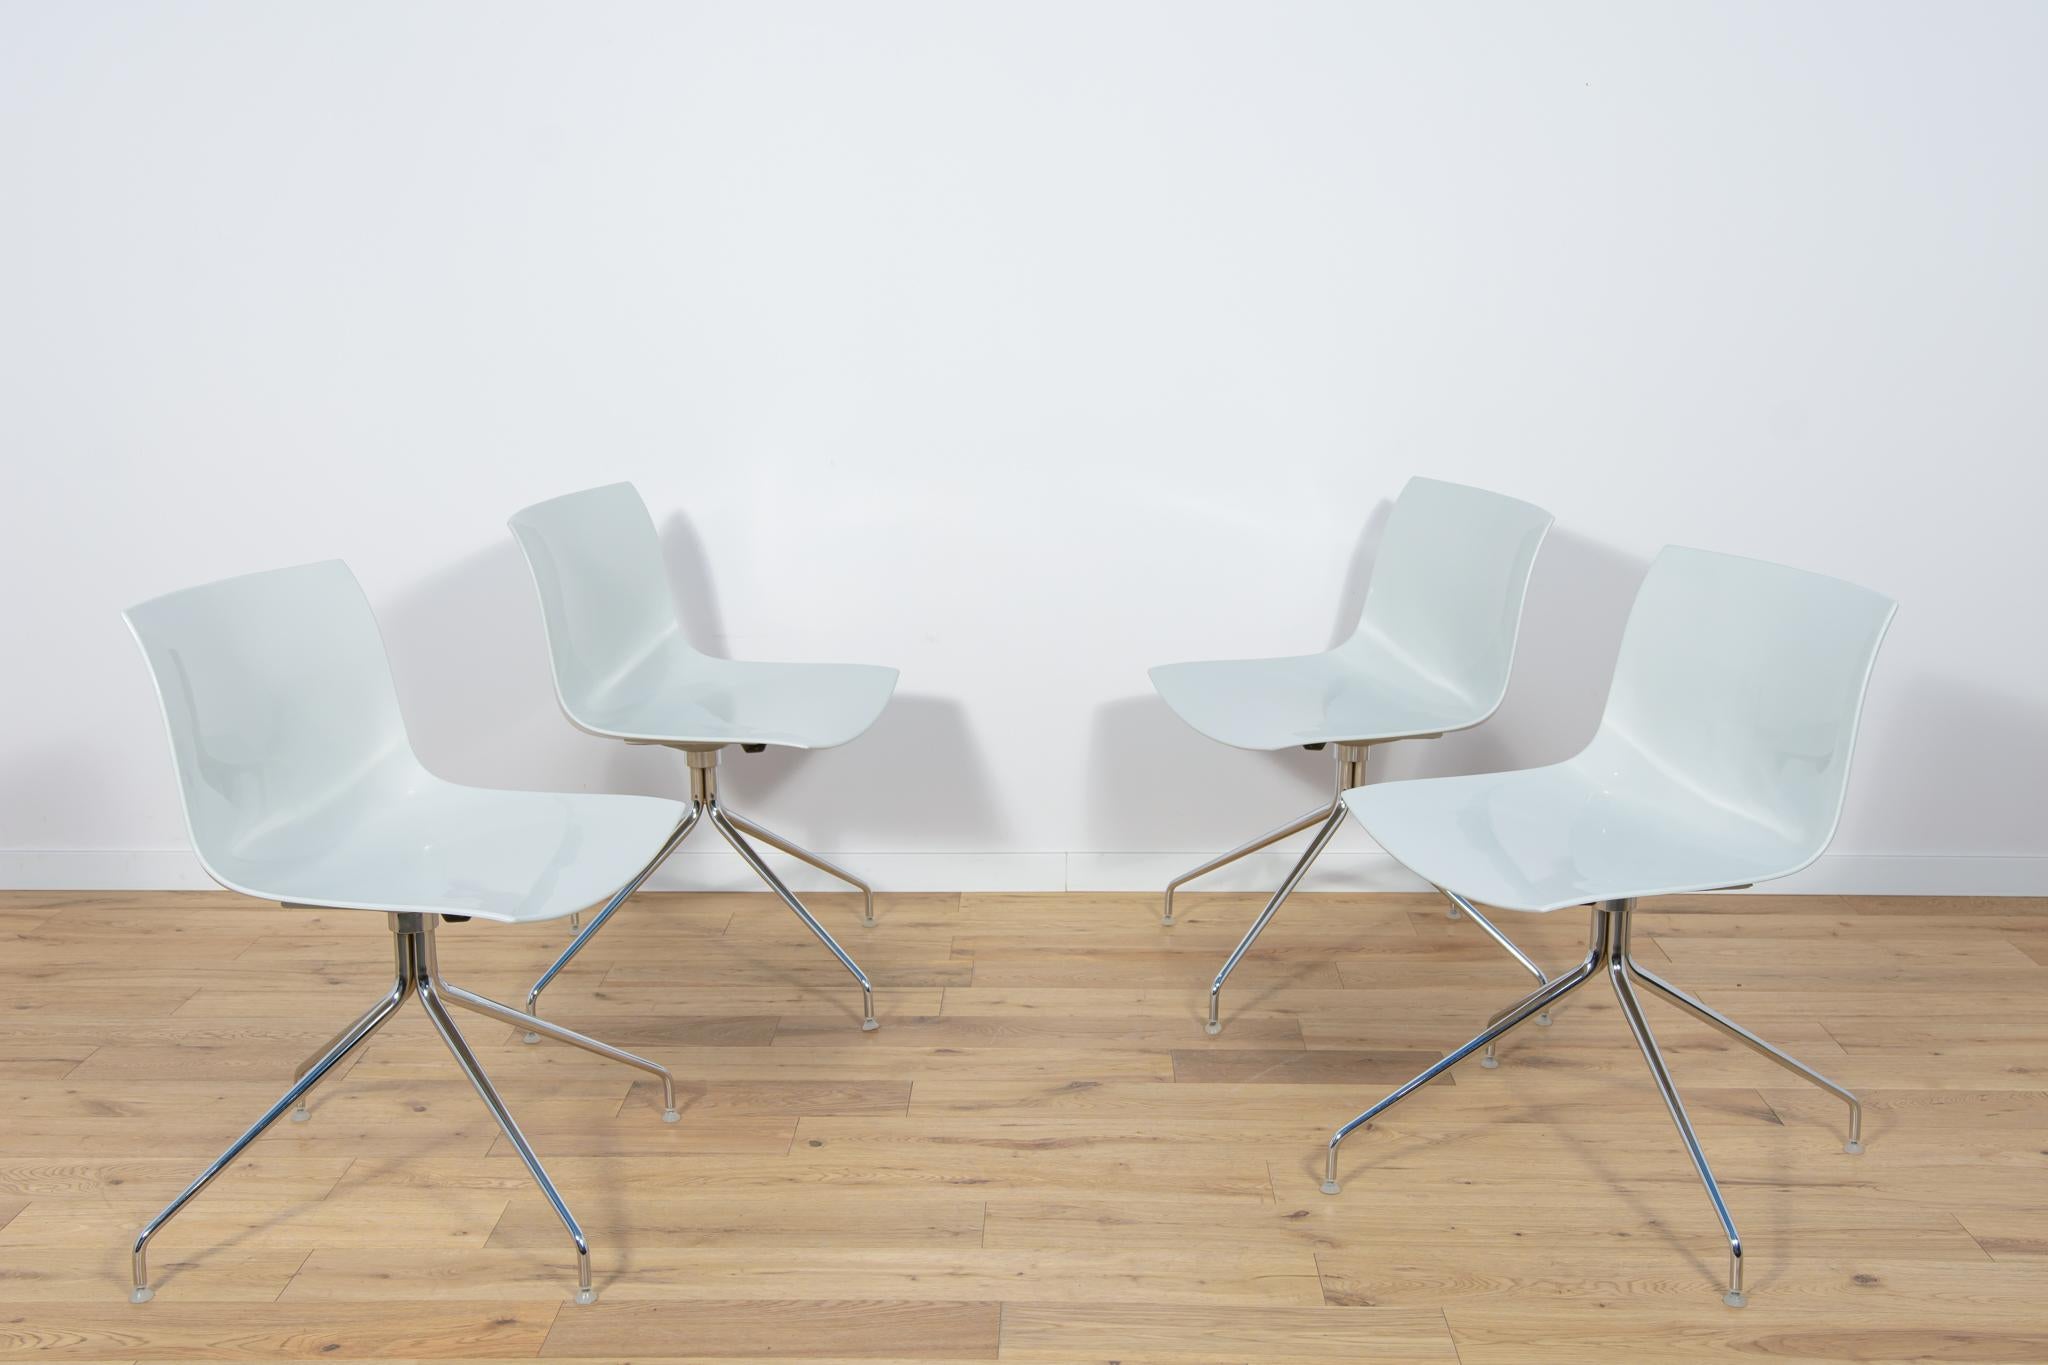 Contemporary Catifa 53 Desk Chairs by Lievore Altherr Molina for Arper, 2000s, Set of 4 For Sale